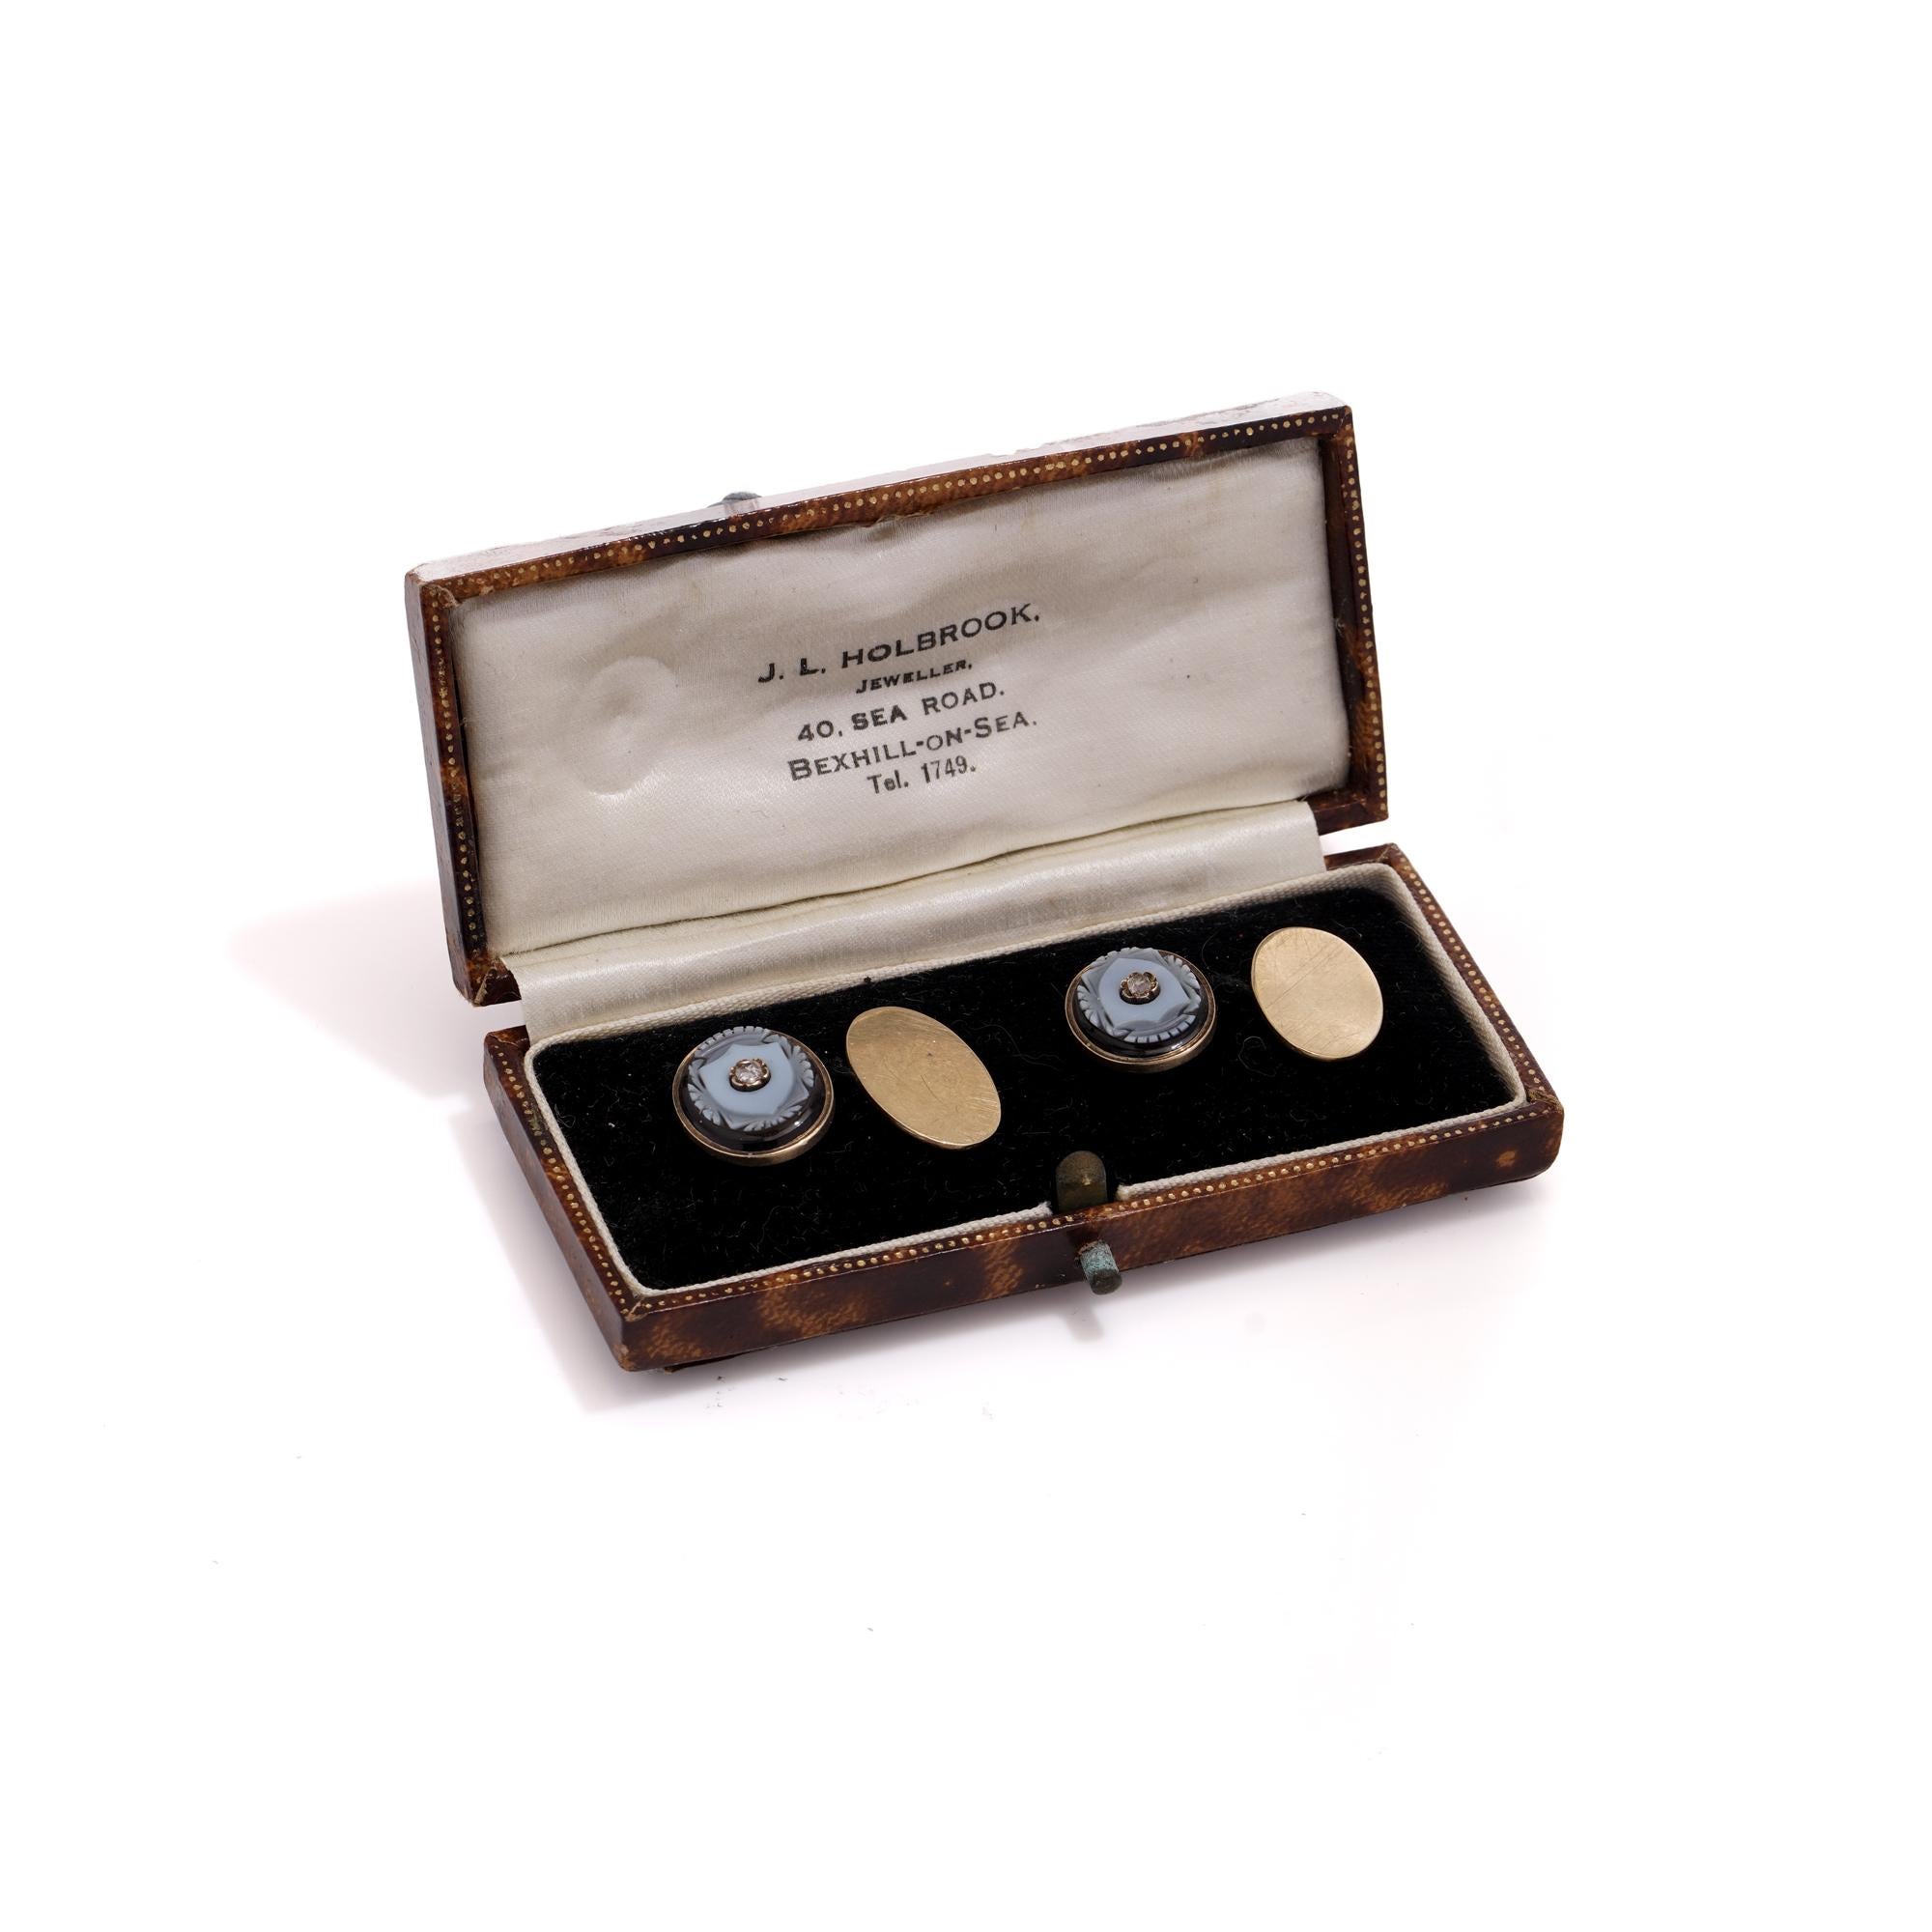 Antique Victorian 9kt. gold and banded agate pair of cufflinks with diamond accents at the centres.
Each cufflinks is set with banded agate carving featuring a crest of shield set with diamond. 
Made in England, Circa 1860 - 1870's
X-ray tested